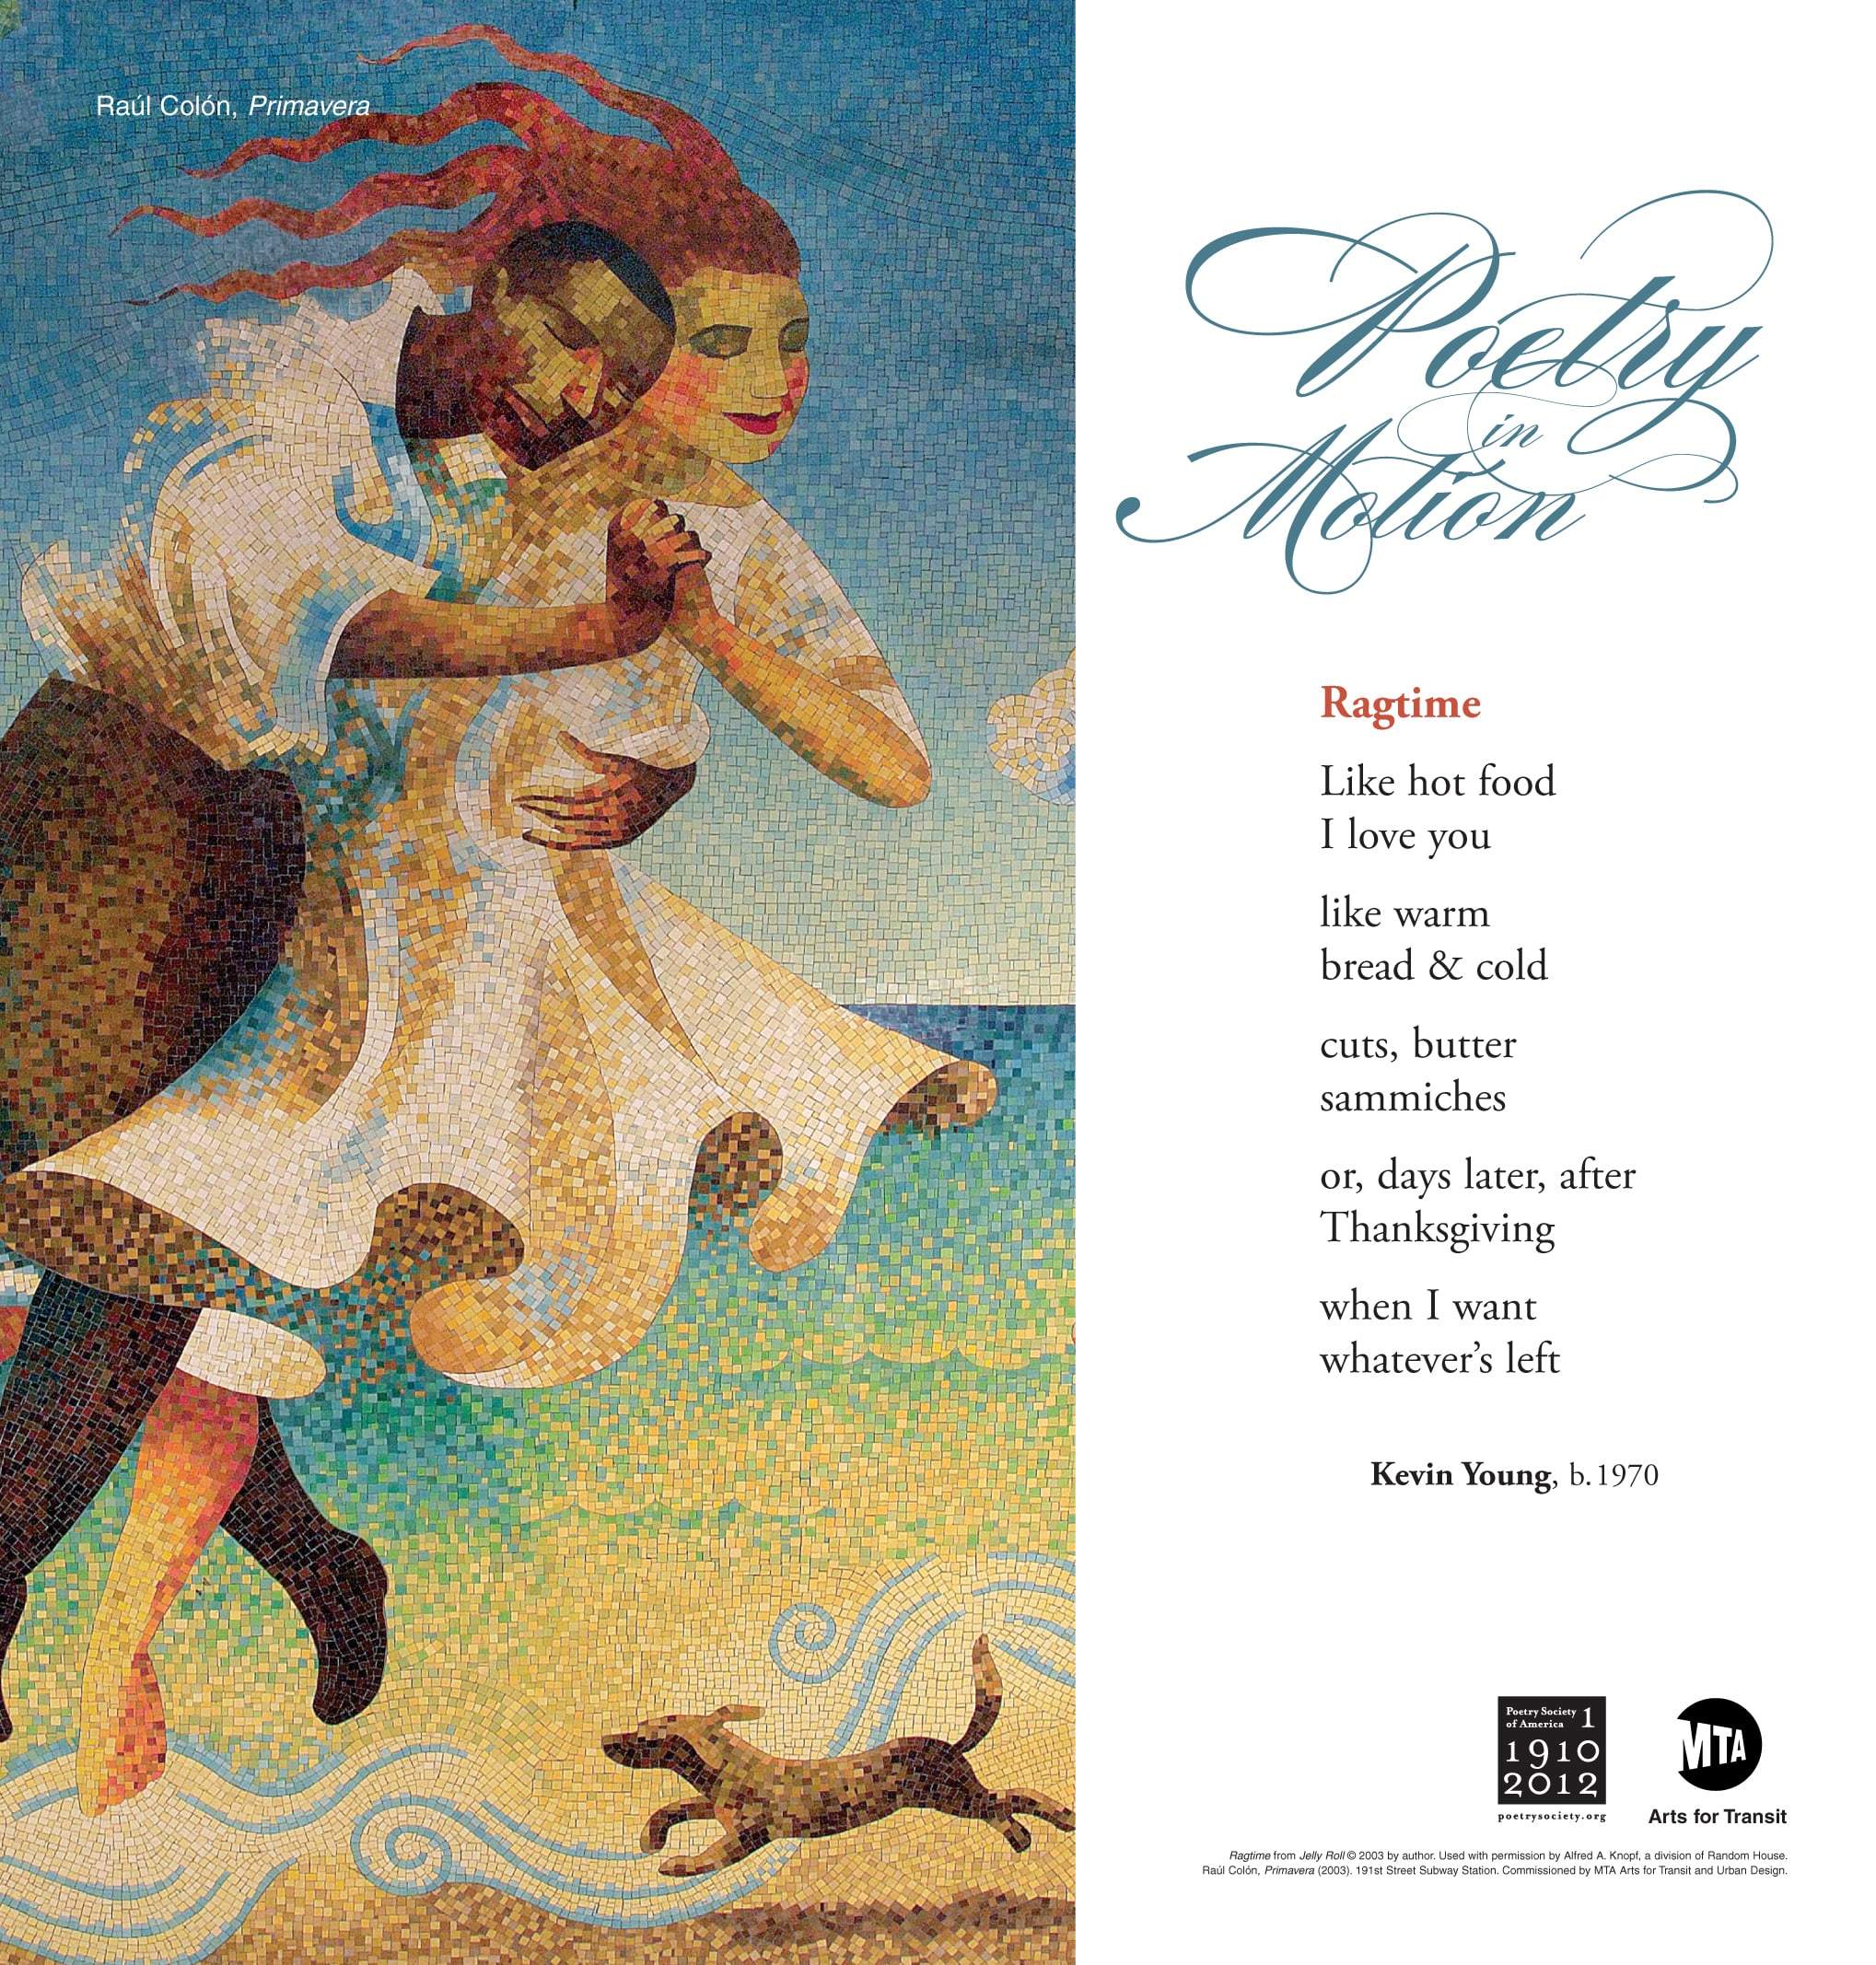 A poster featuring art by Raúl Colón depicts a colorful glass mosaic of a dancing couple. To the right of the artwork is a poem titled Ragtime by Kevin Young.